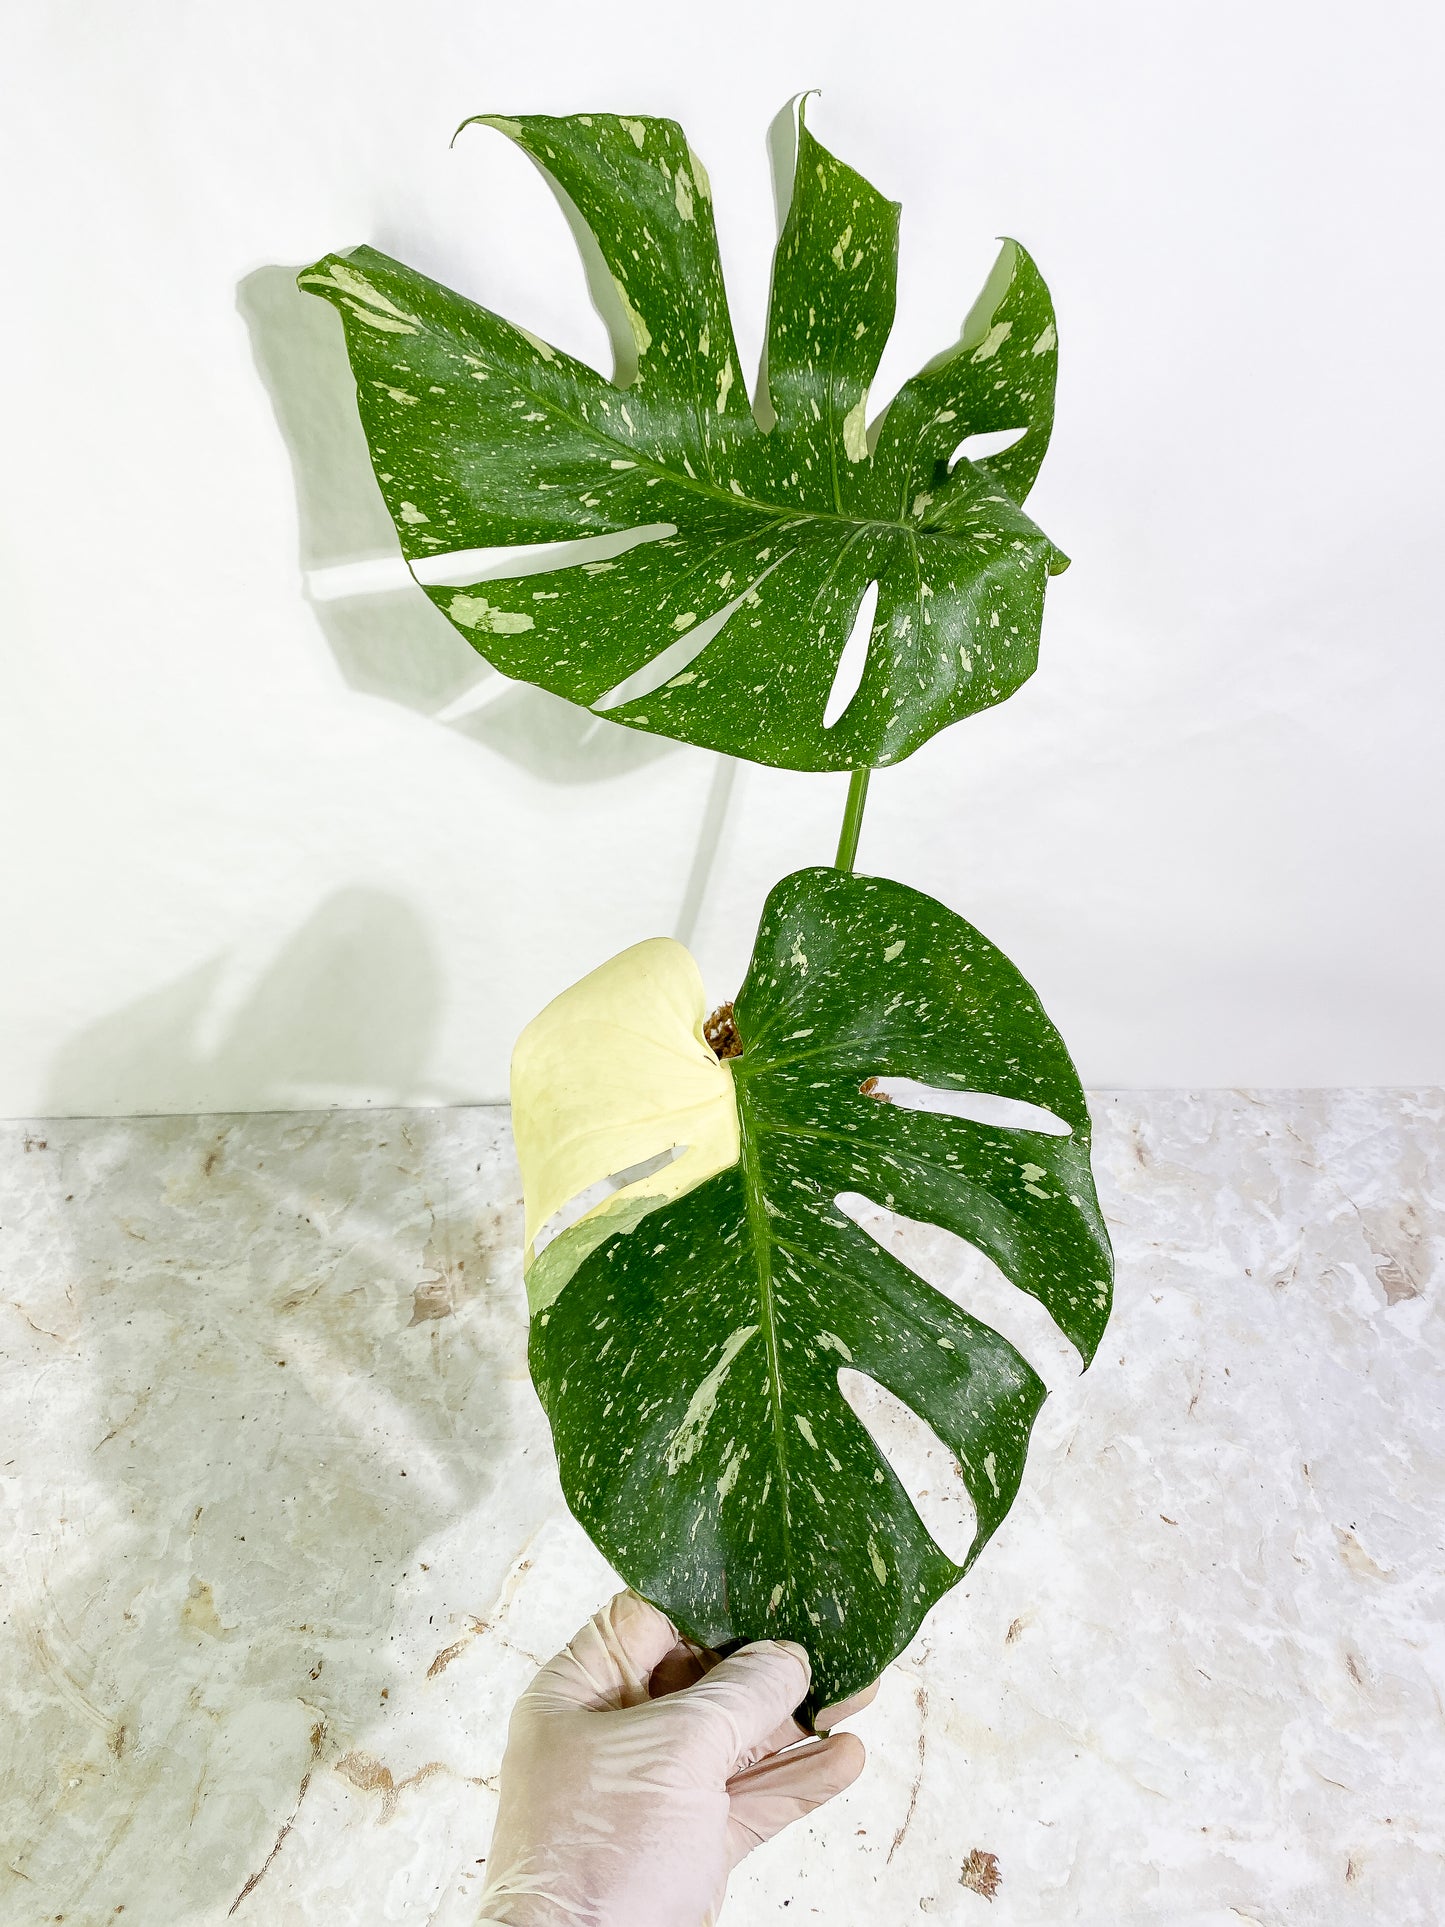 Monstera Thai Constellation  Slightly Rooted 2 leaves Top Cutting XL Highly Variegated